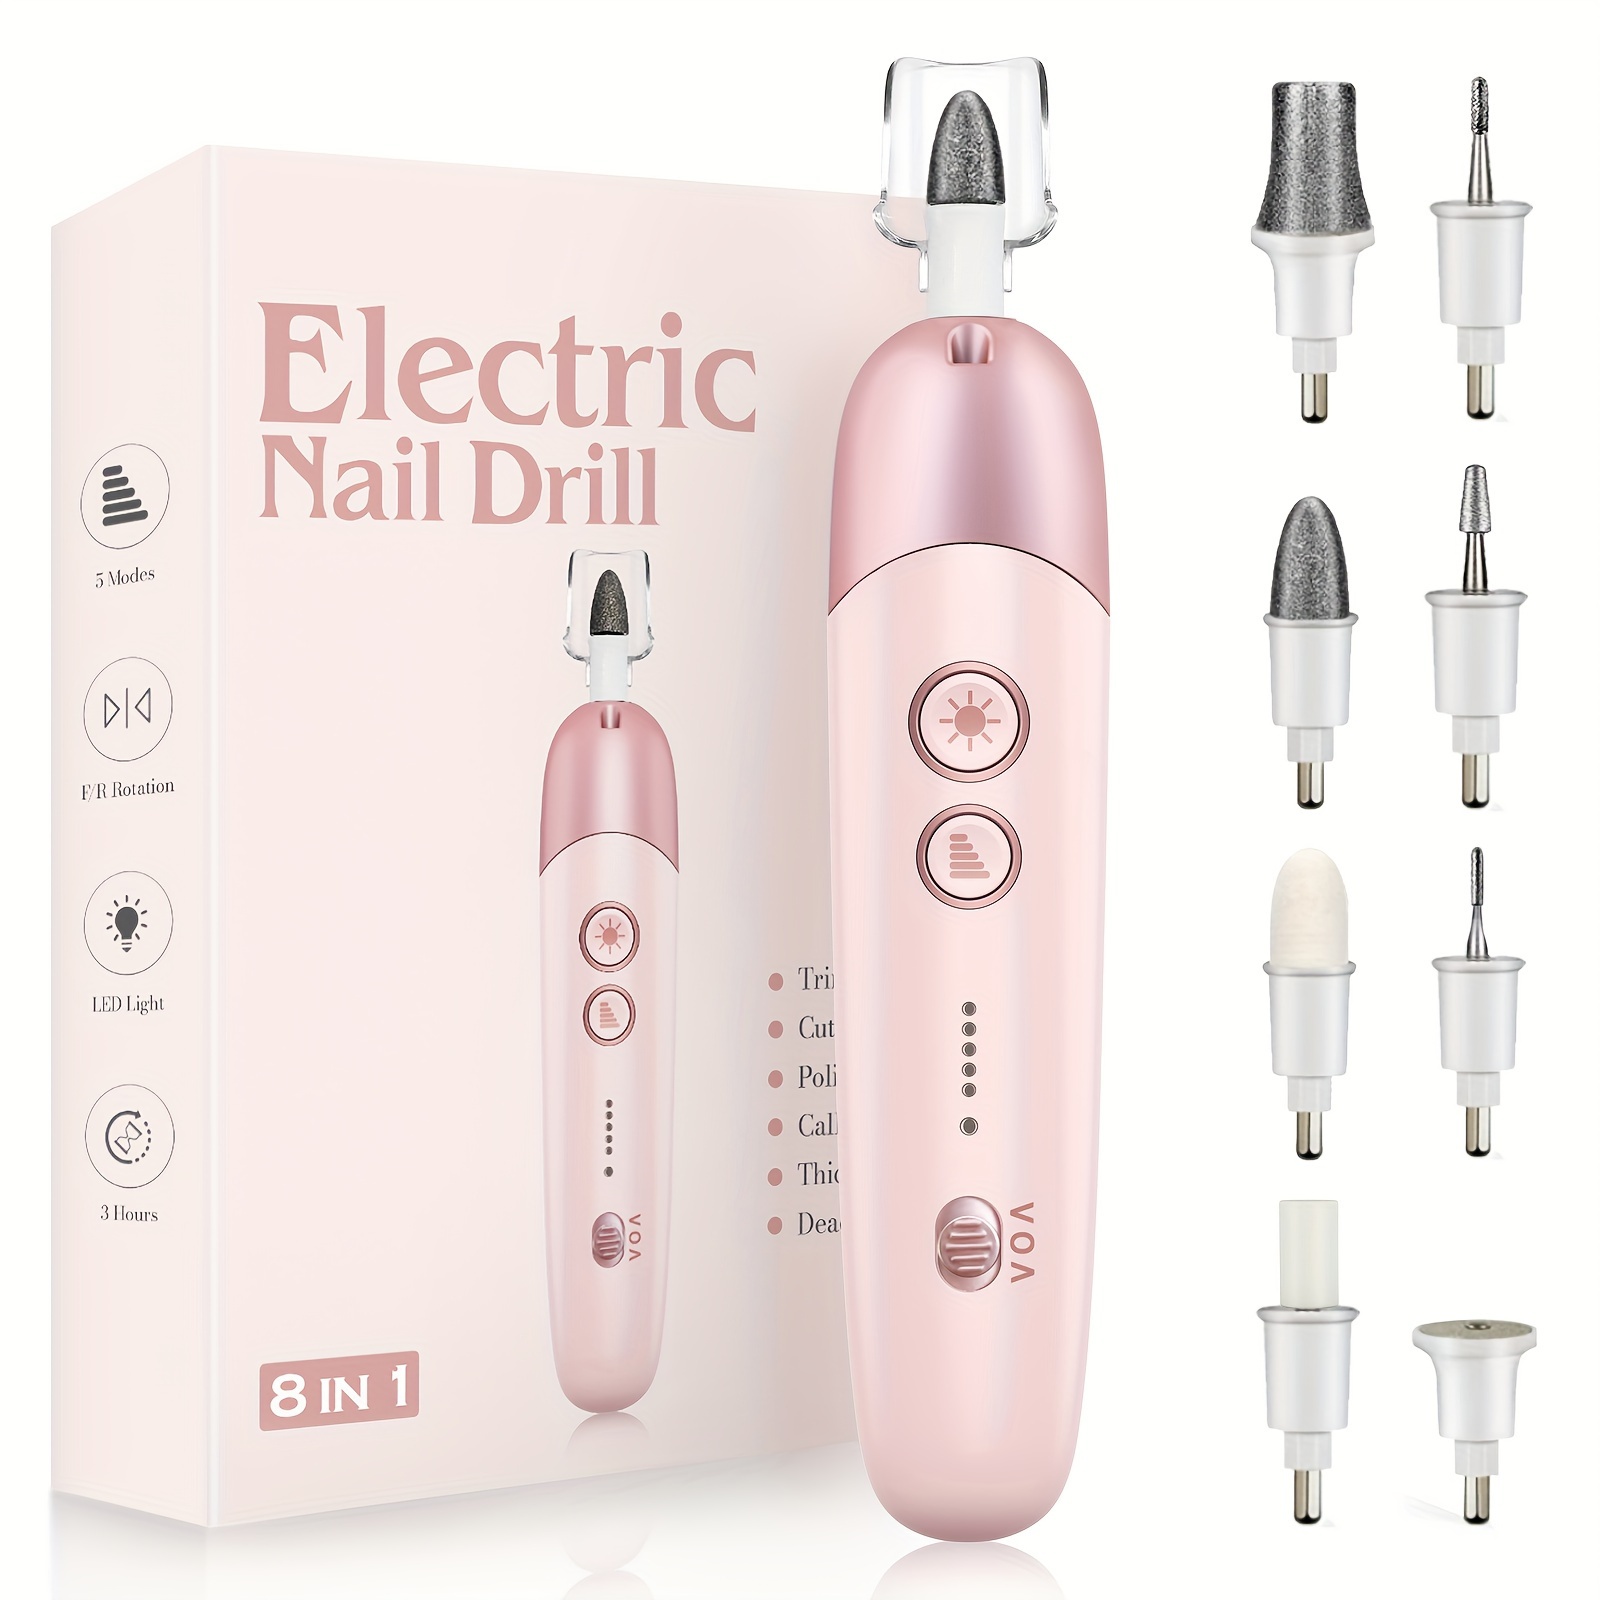 

Electric Nail Drill Machine, 8 In 1 Professional Cordless Electric Nail File Kit With Led Light, Professional Manicure And Pedicure Kit For Calluses Nail Polishing Grinder Sander Trimmer With 5 Speeds